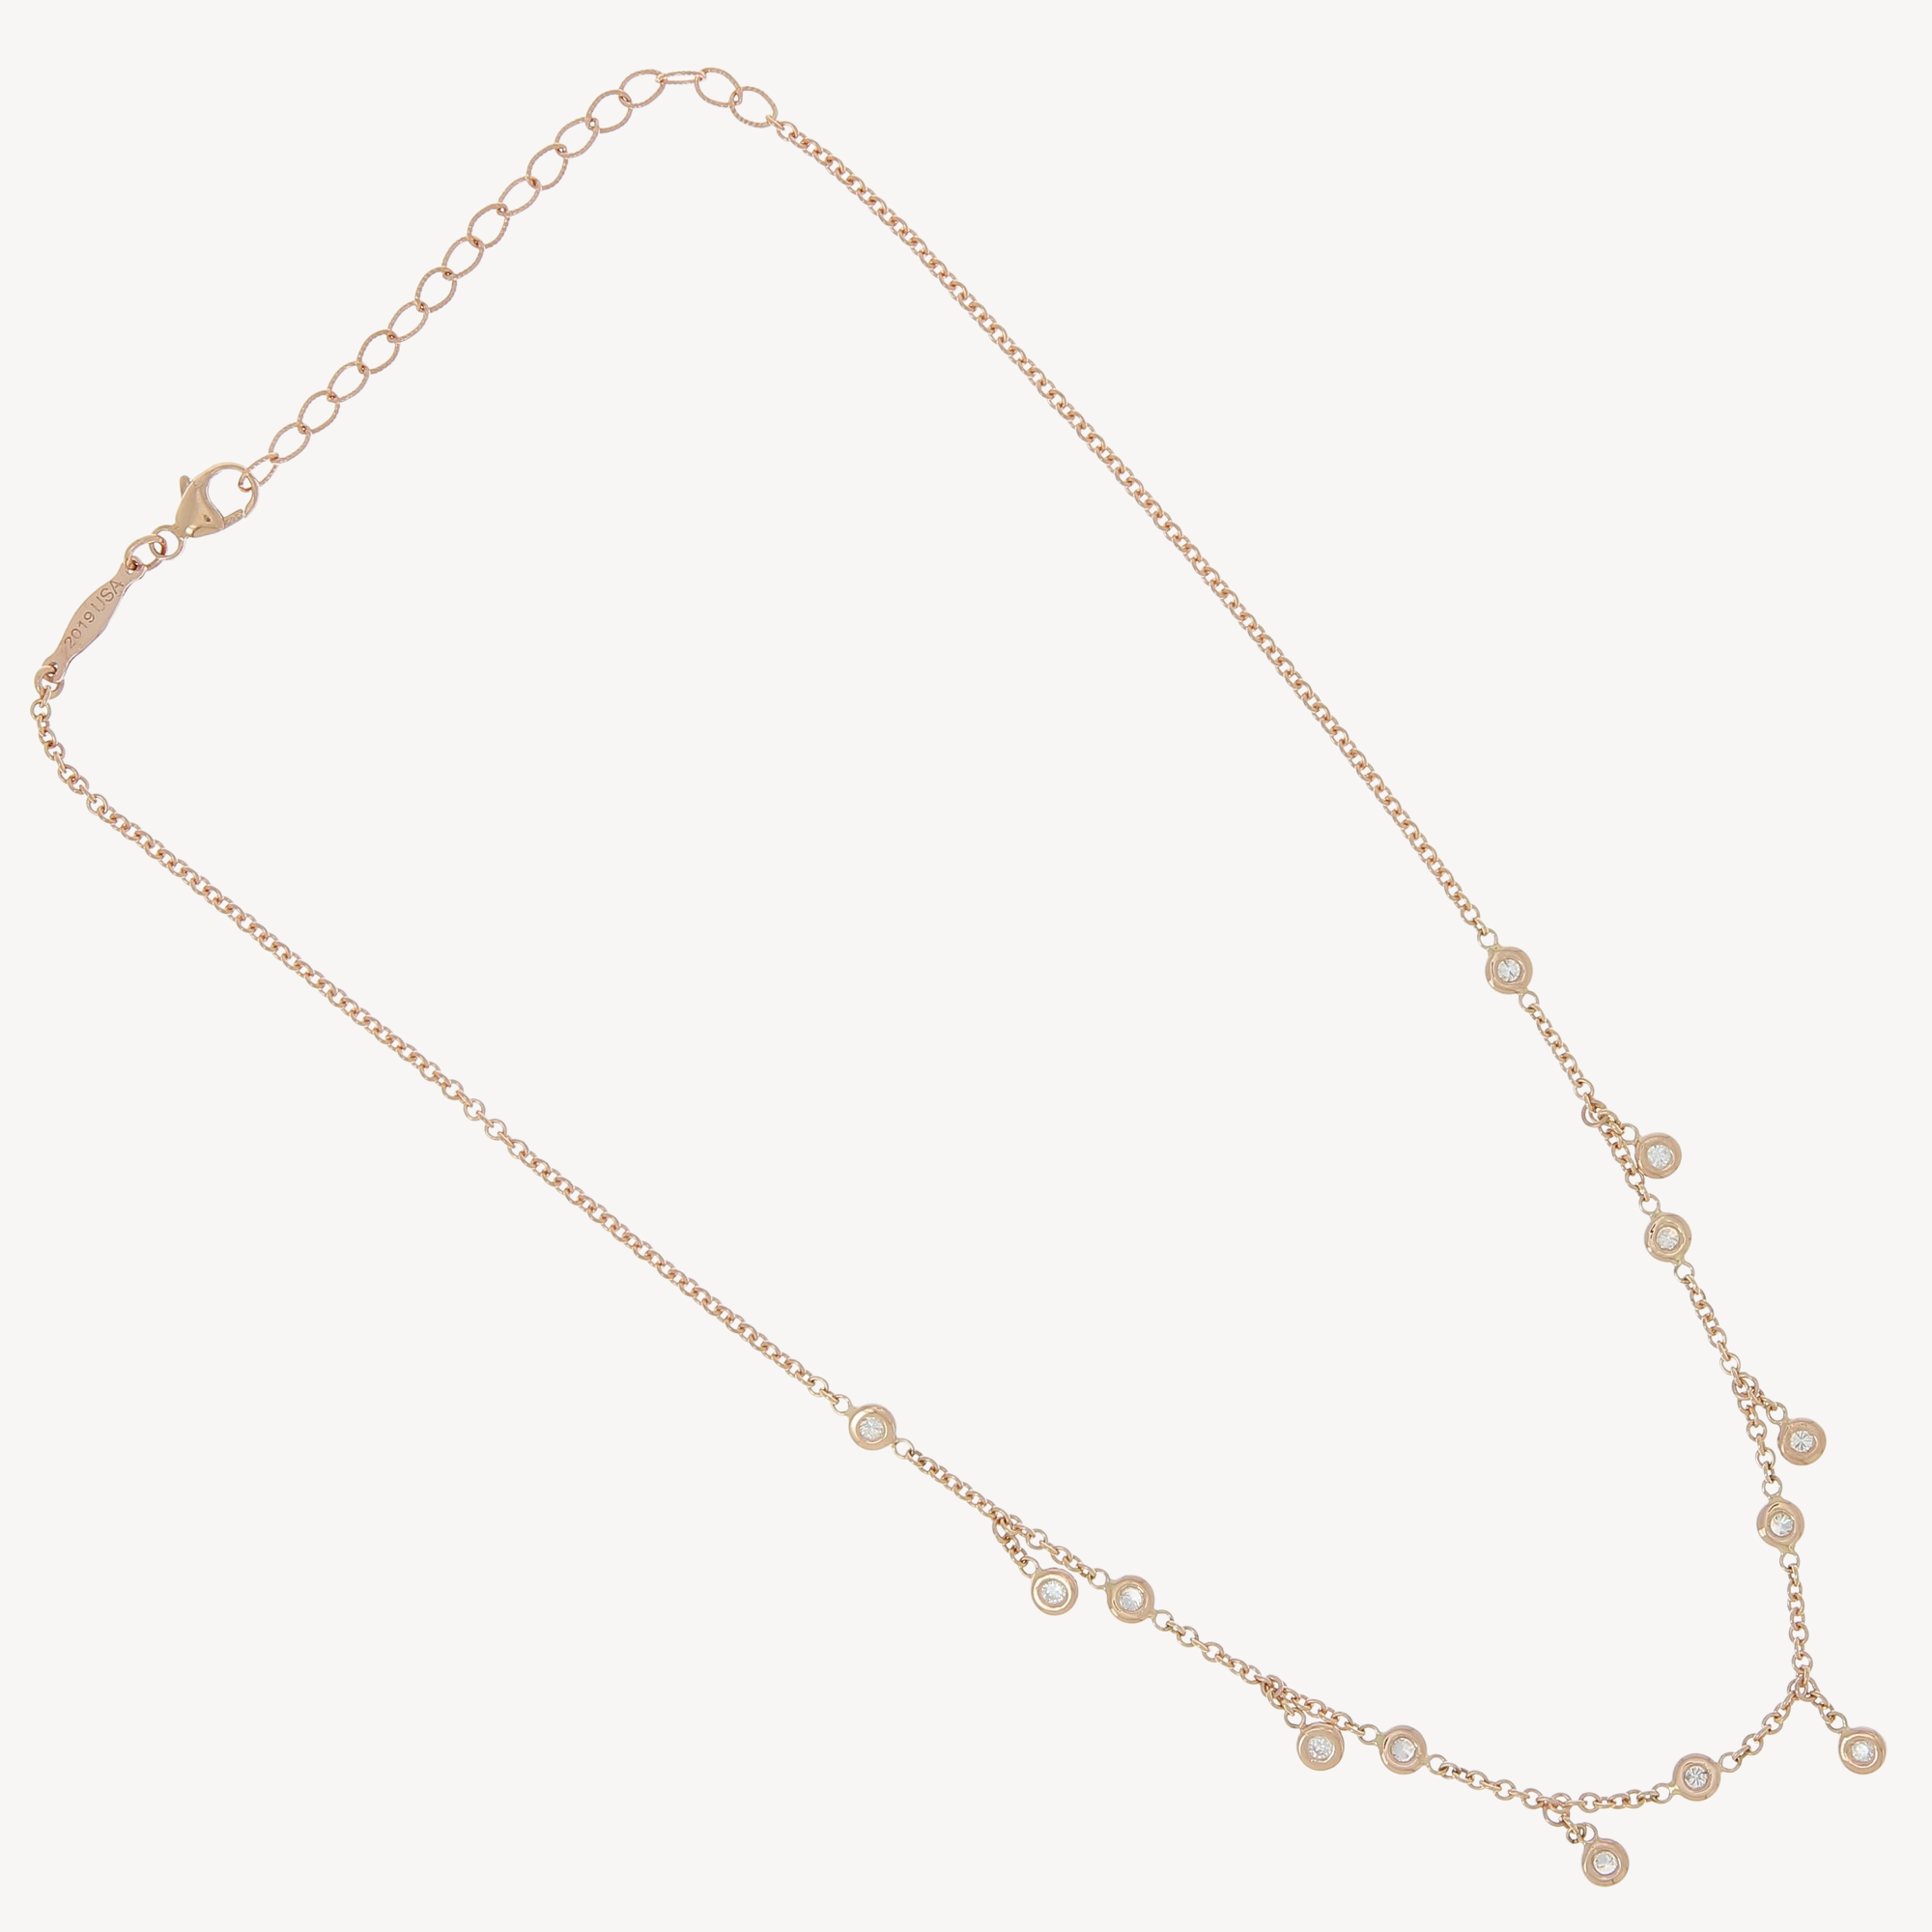 Spaced out diamond half shaker necklace